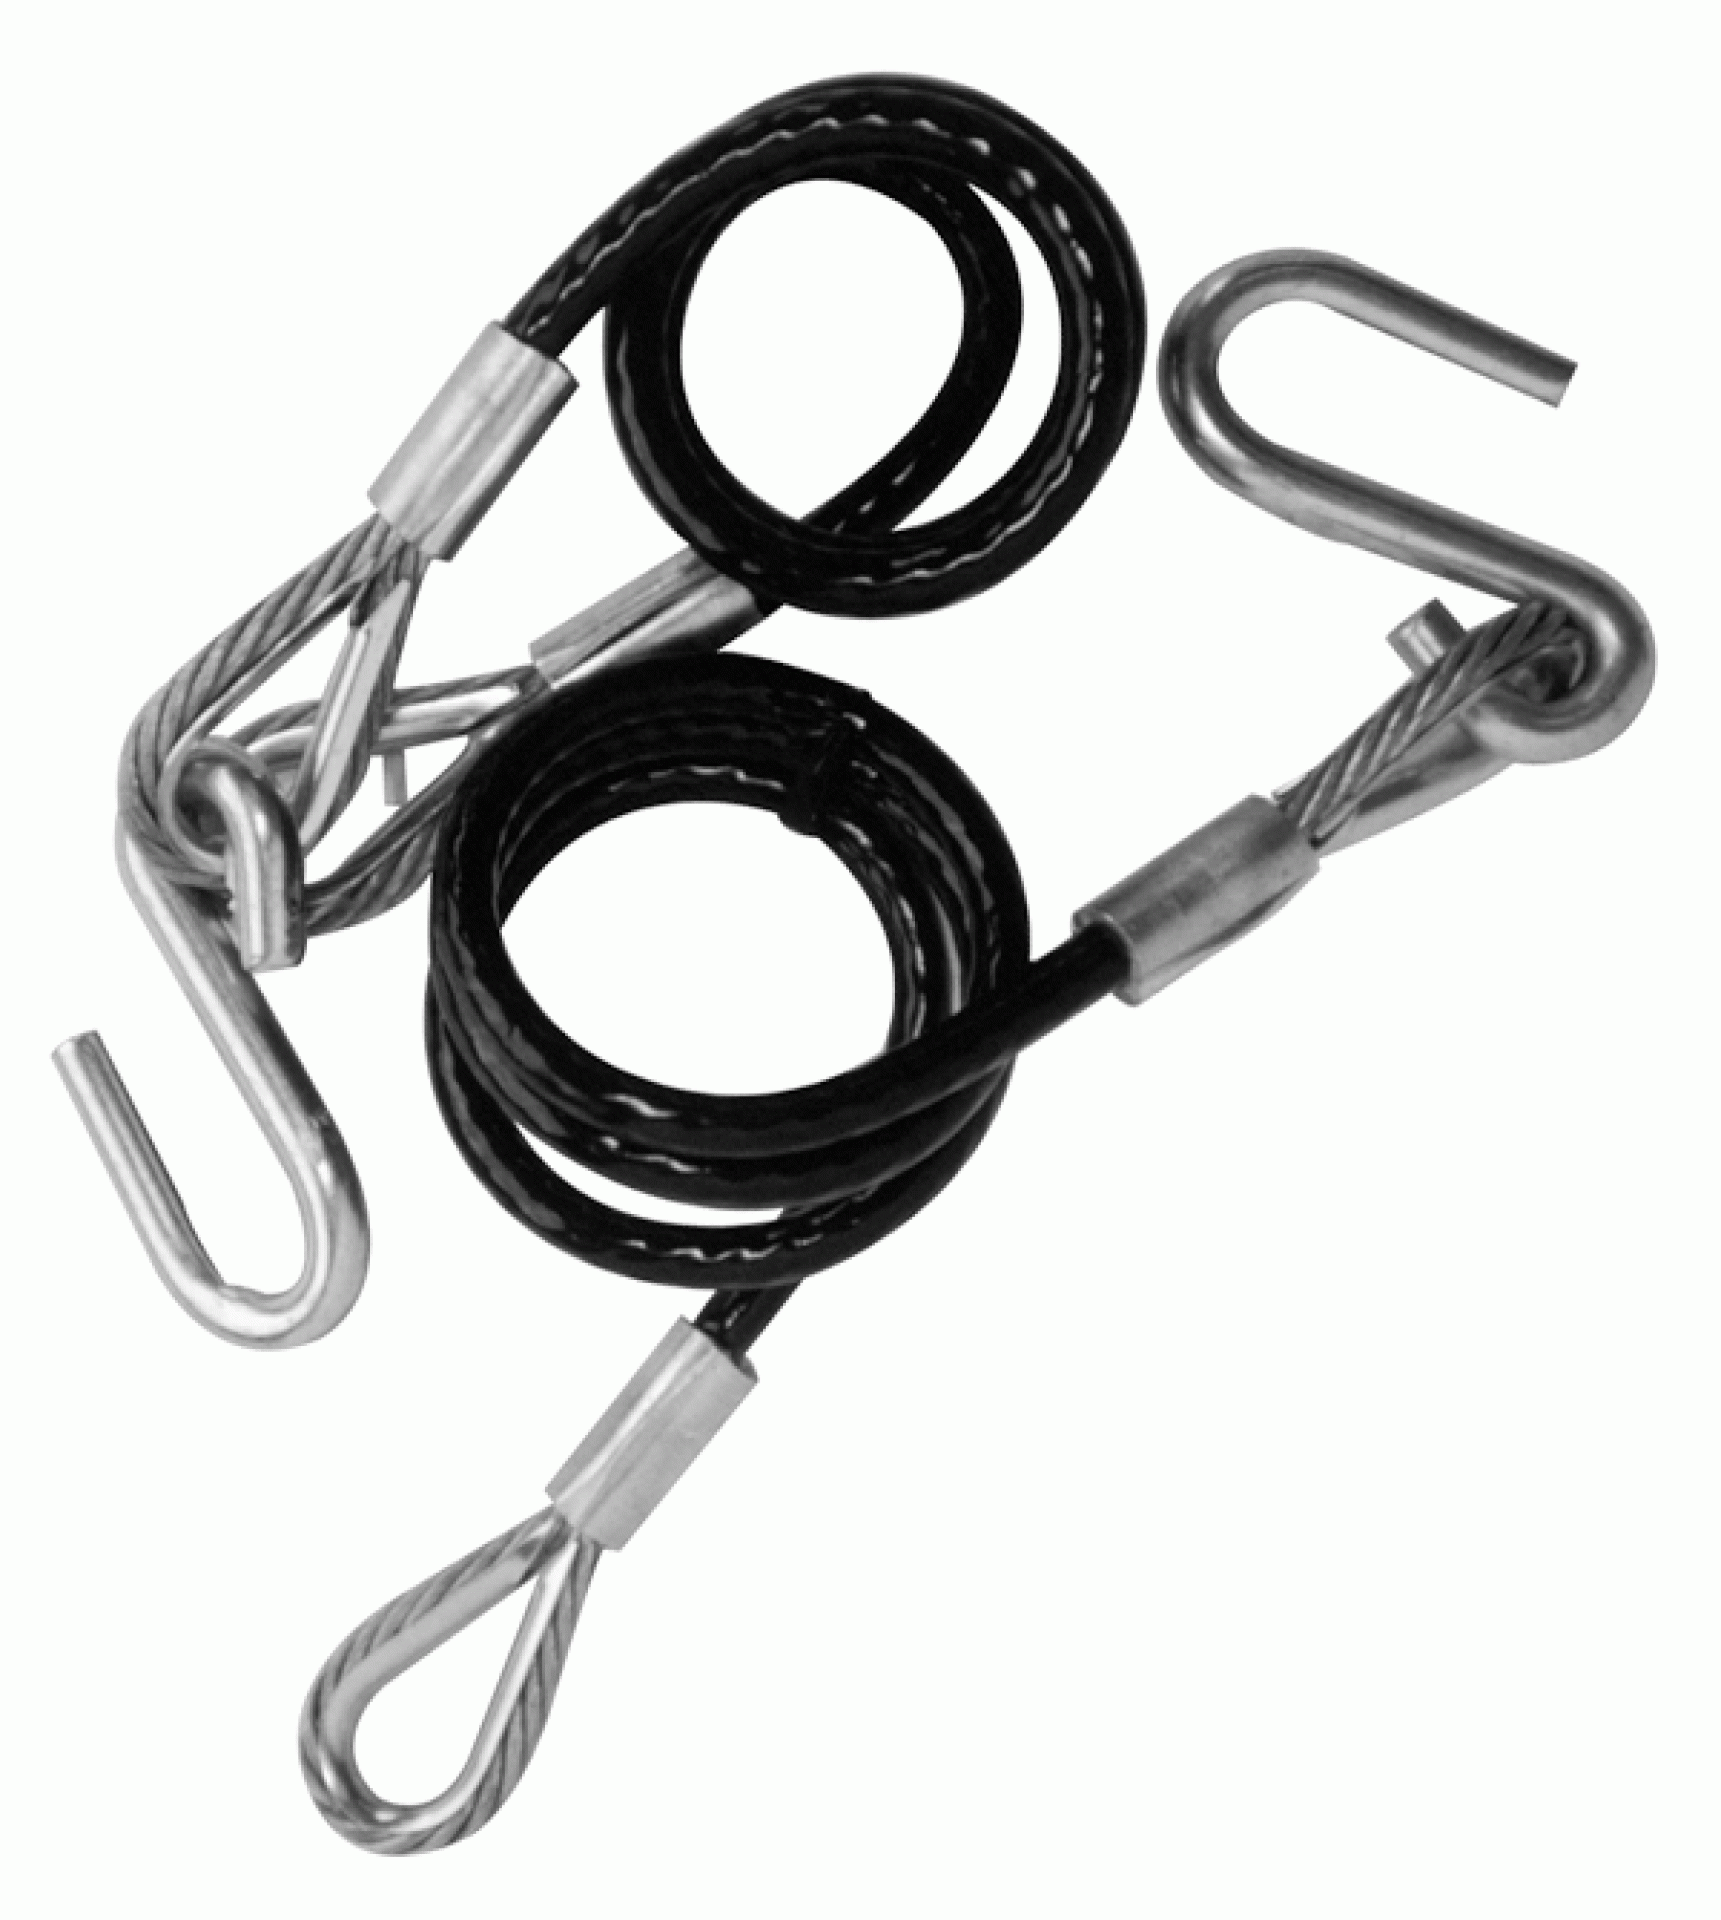 SAFETY CABLE - CLASS 1  2,000 LB. - 36" LONG, PAIR